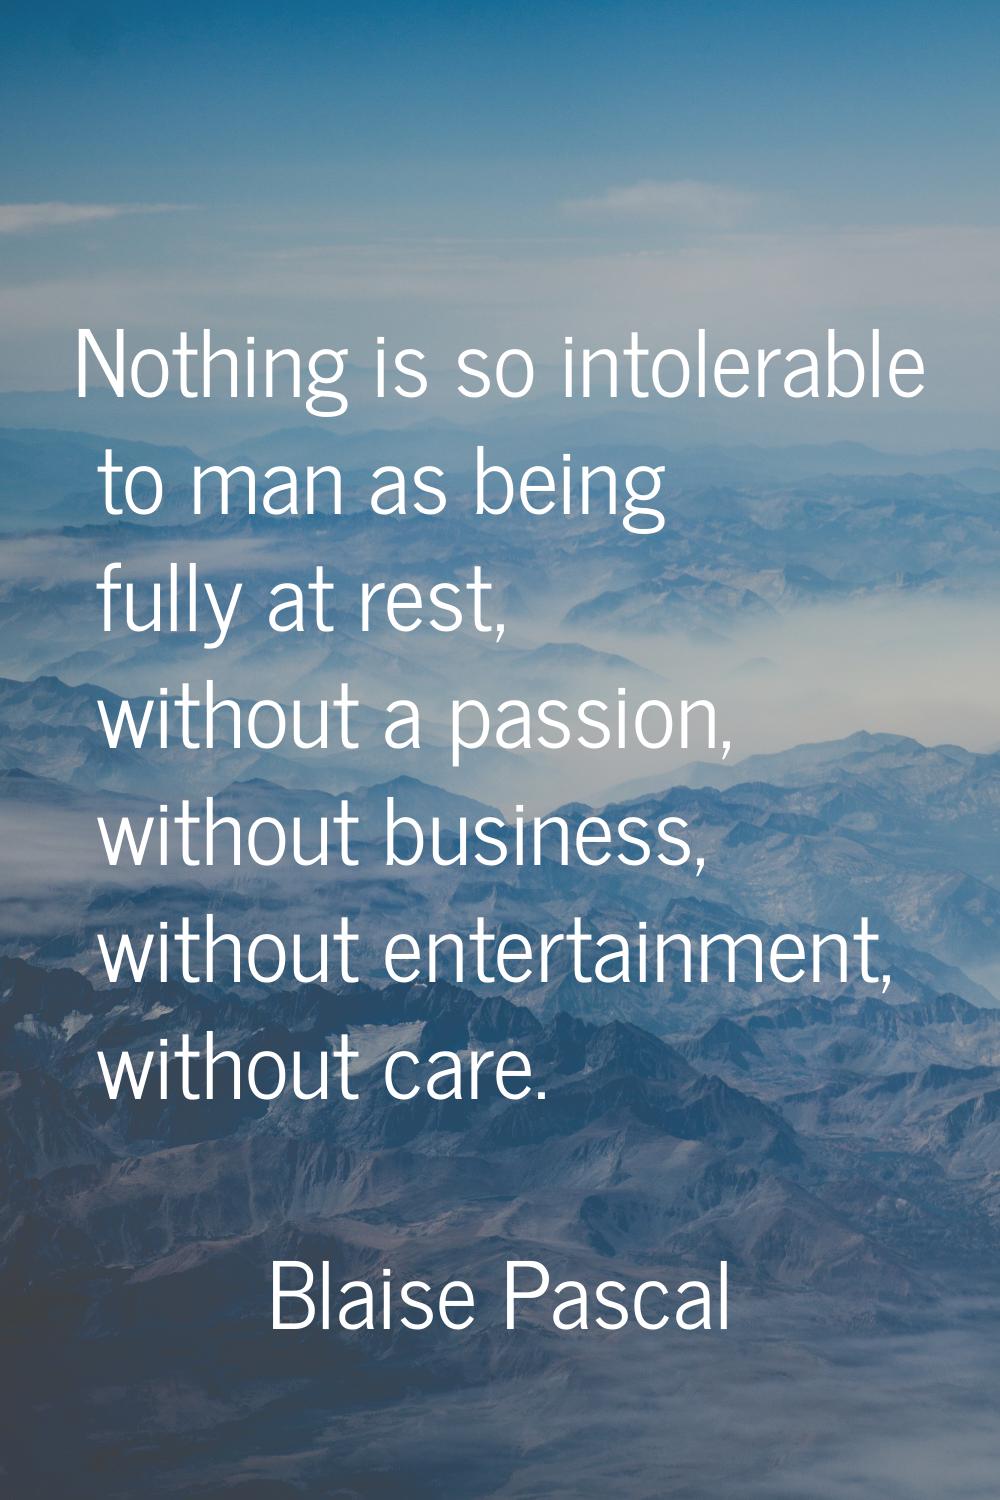 Nothing is so intolerable to man as being fully at rest, without a passion, without business, witho